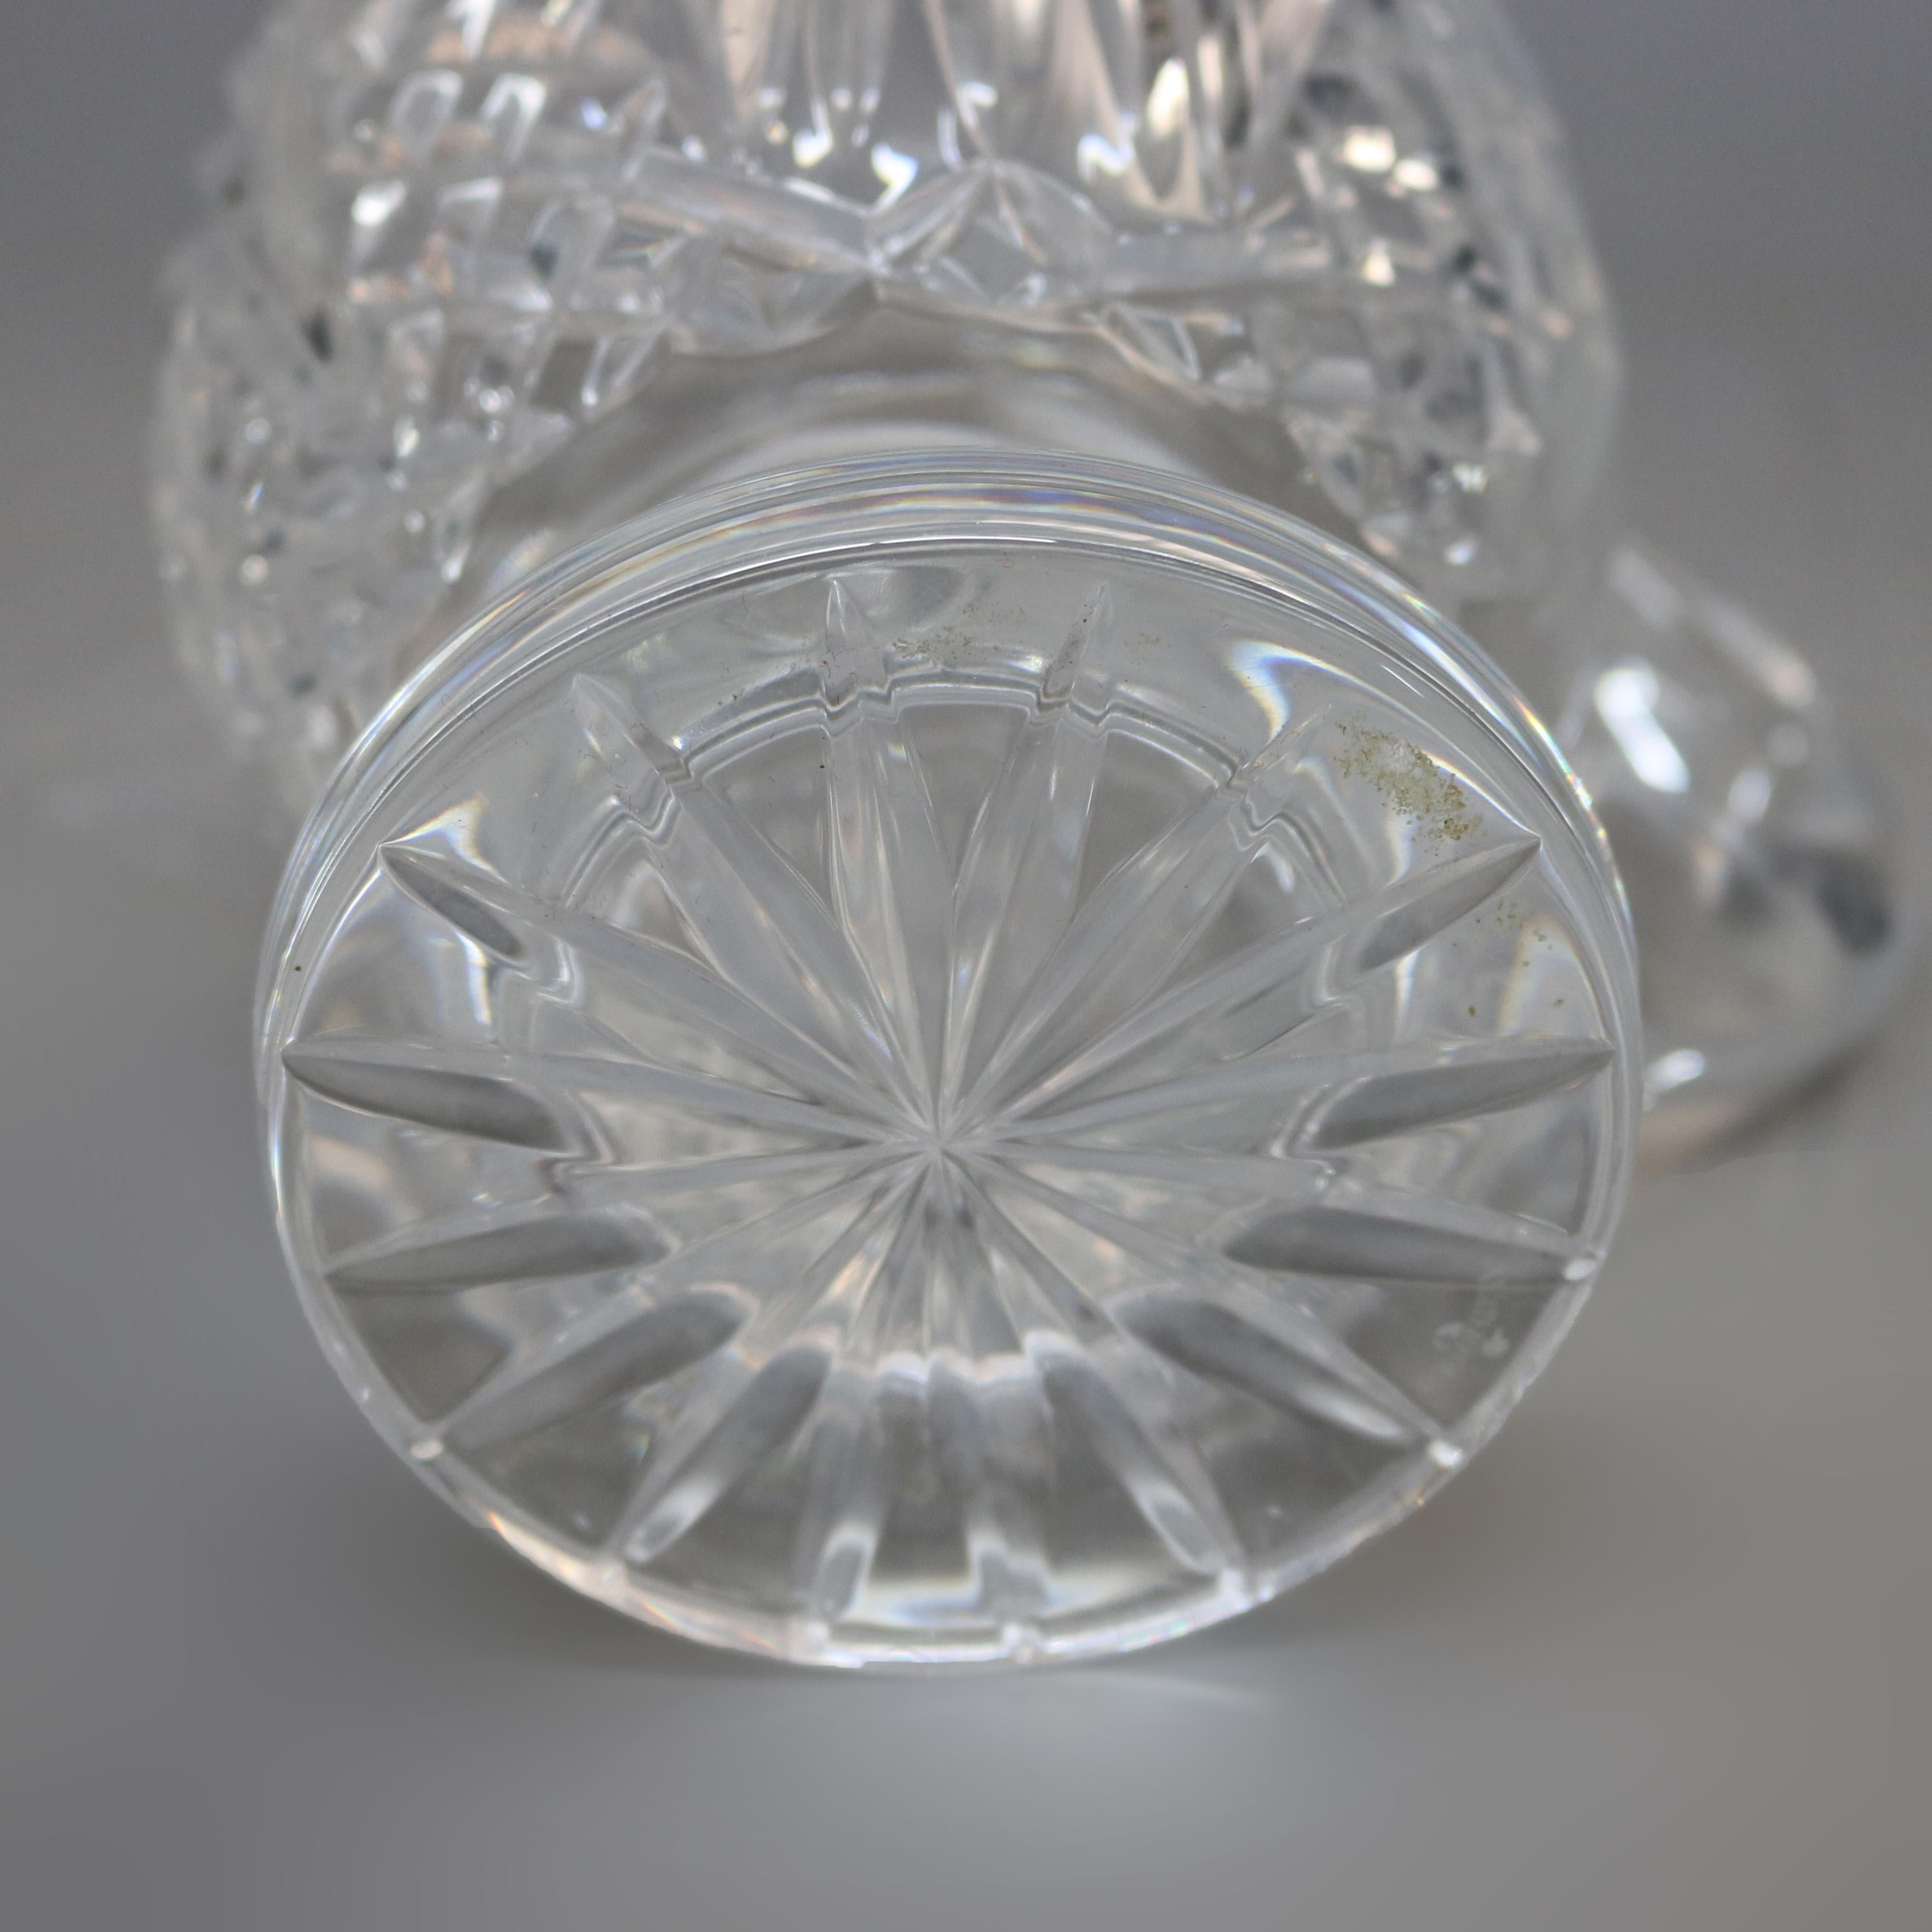 Northern Irish Vintage Waterford Crystal Bunratty Pitcher, Romance of Ireland Collection